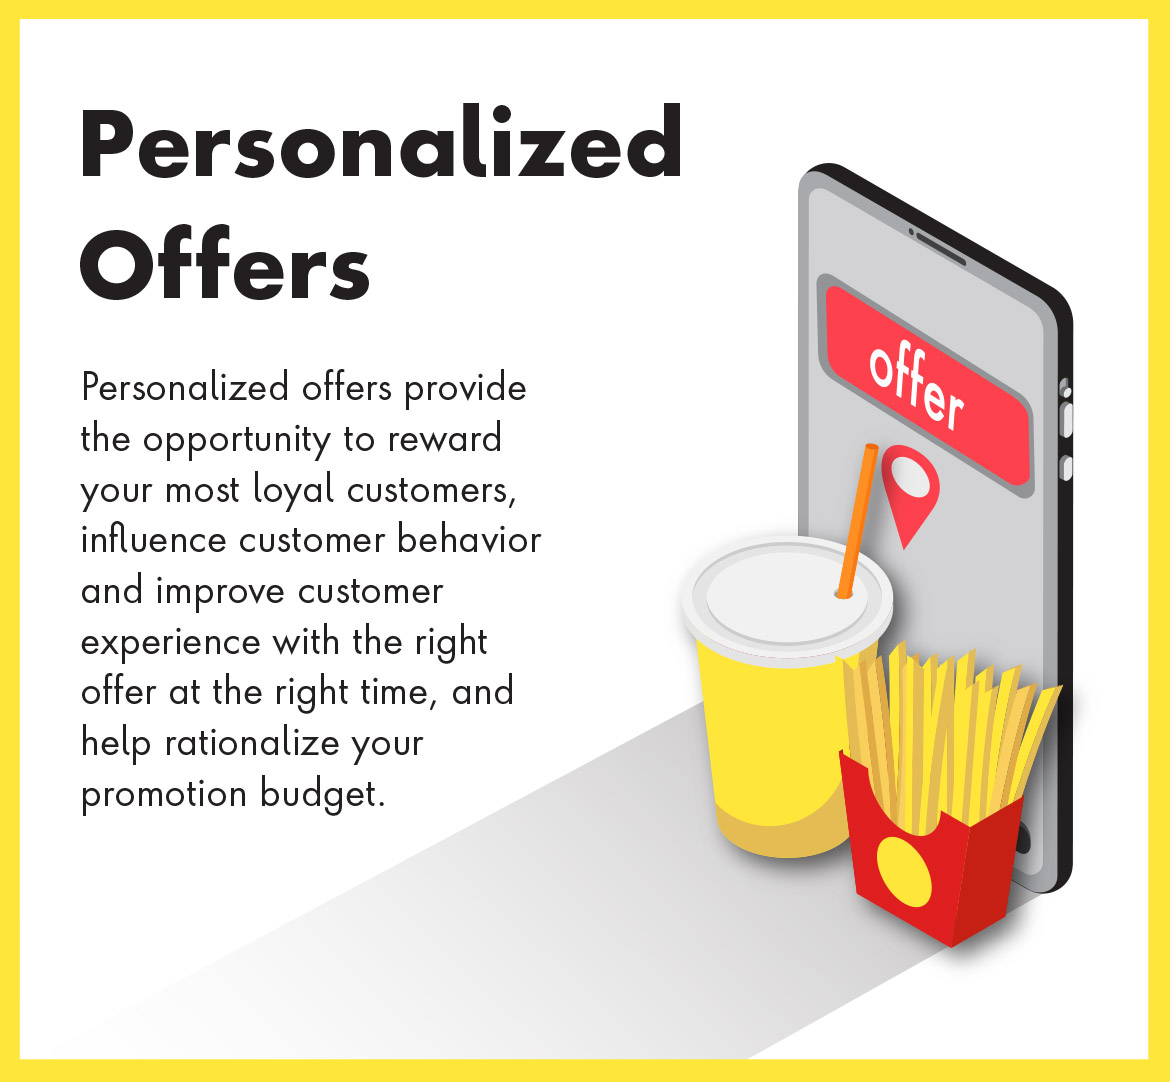 Personalized Offers